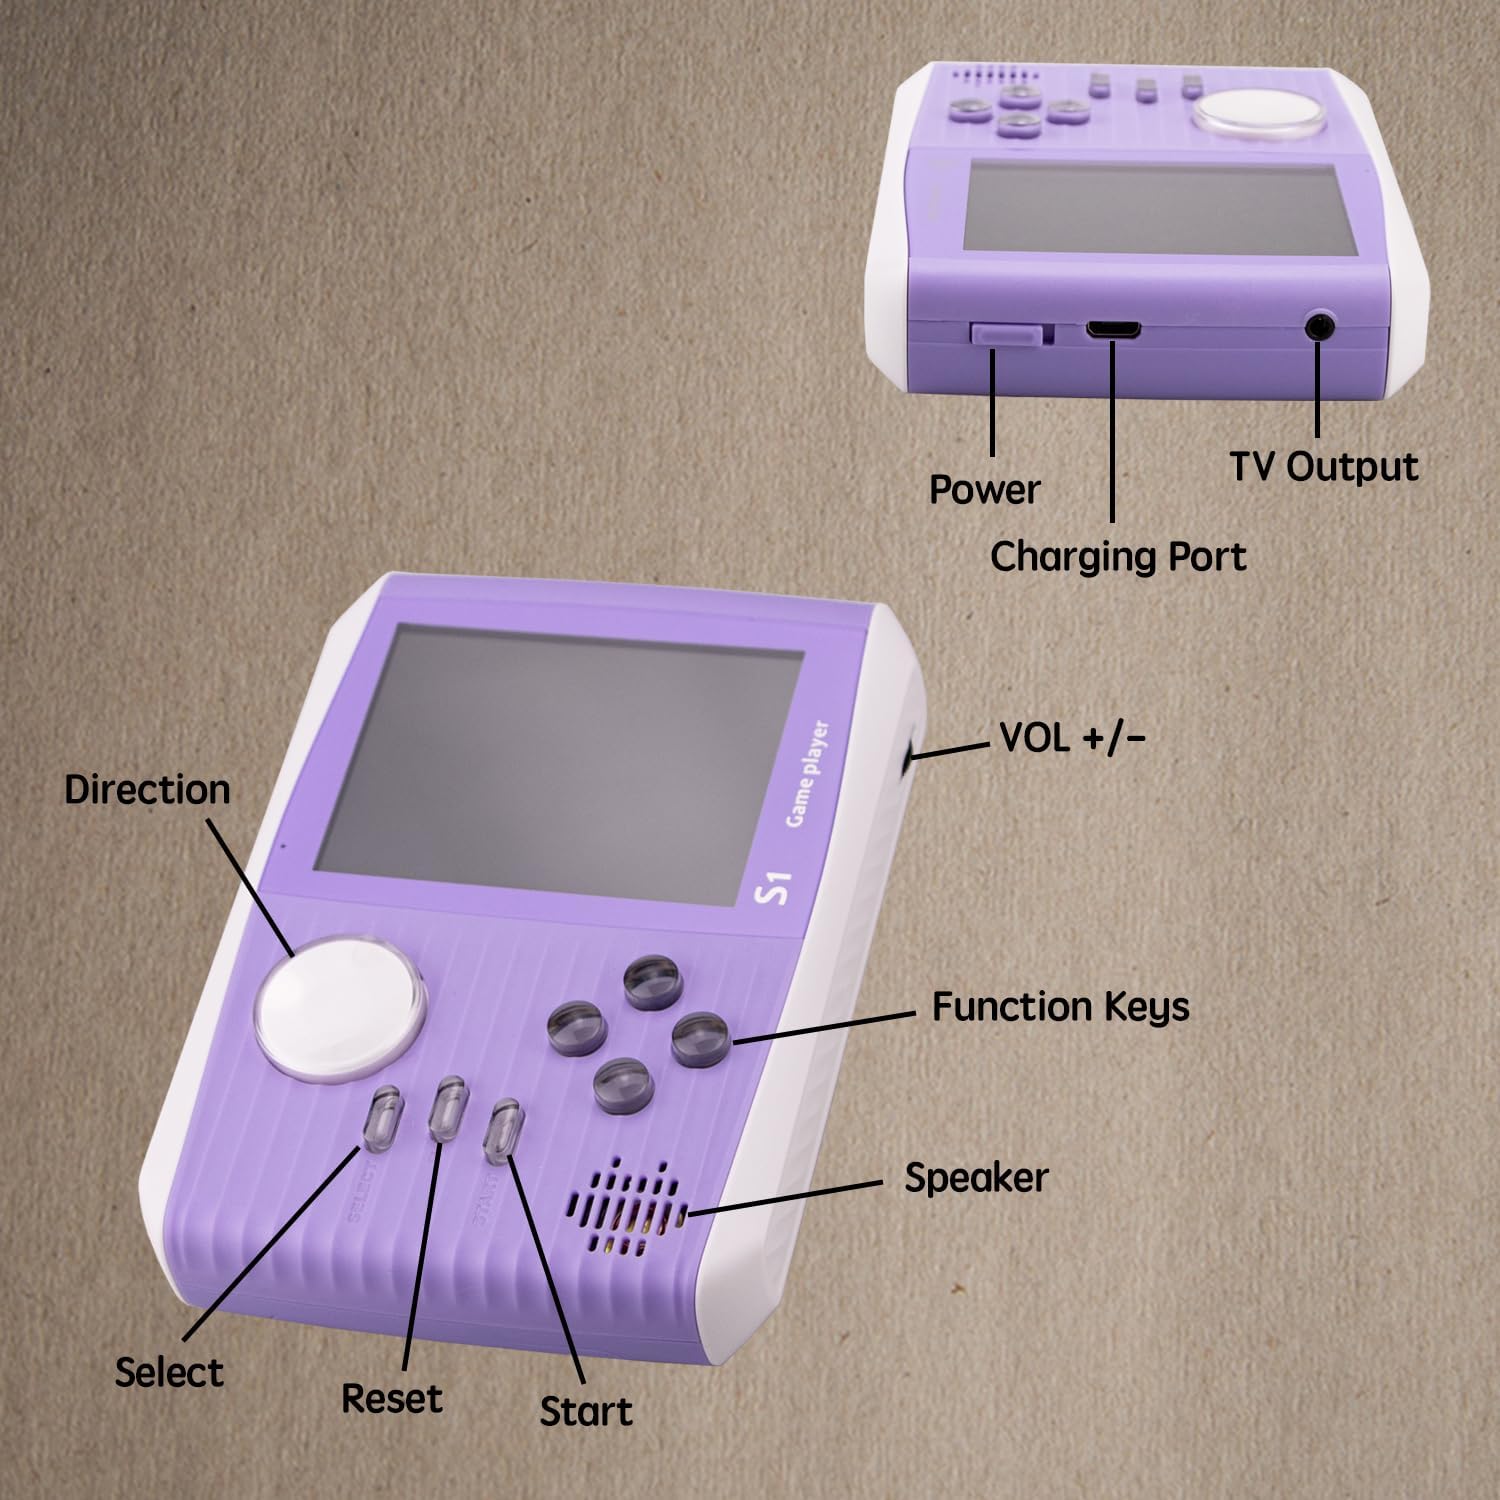 666 Classic Retro Toys for Kids, Rechargeable Battery 3 Inch Screen -Purple